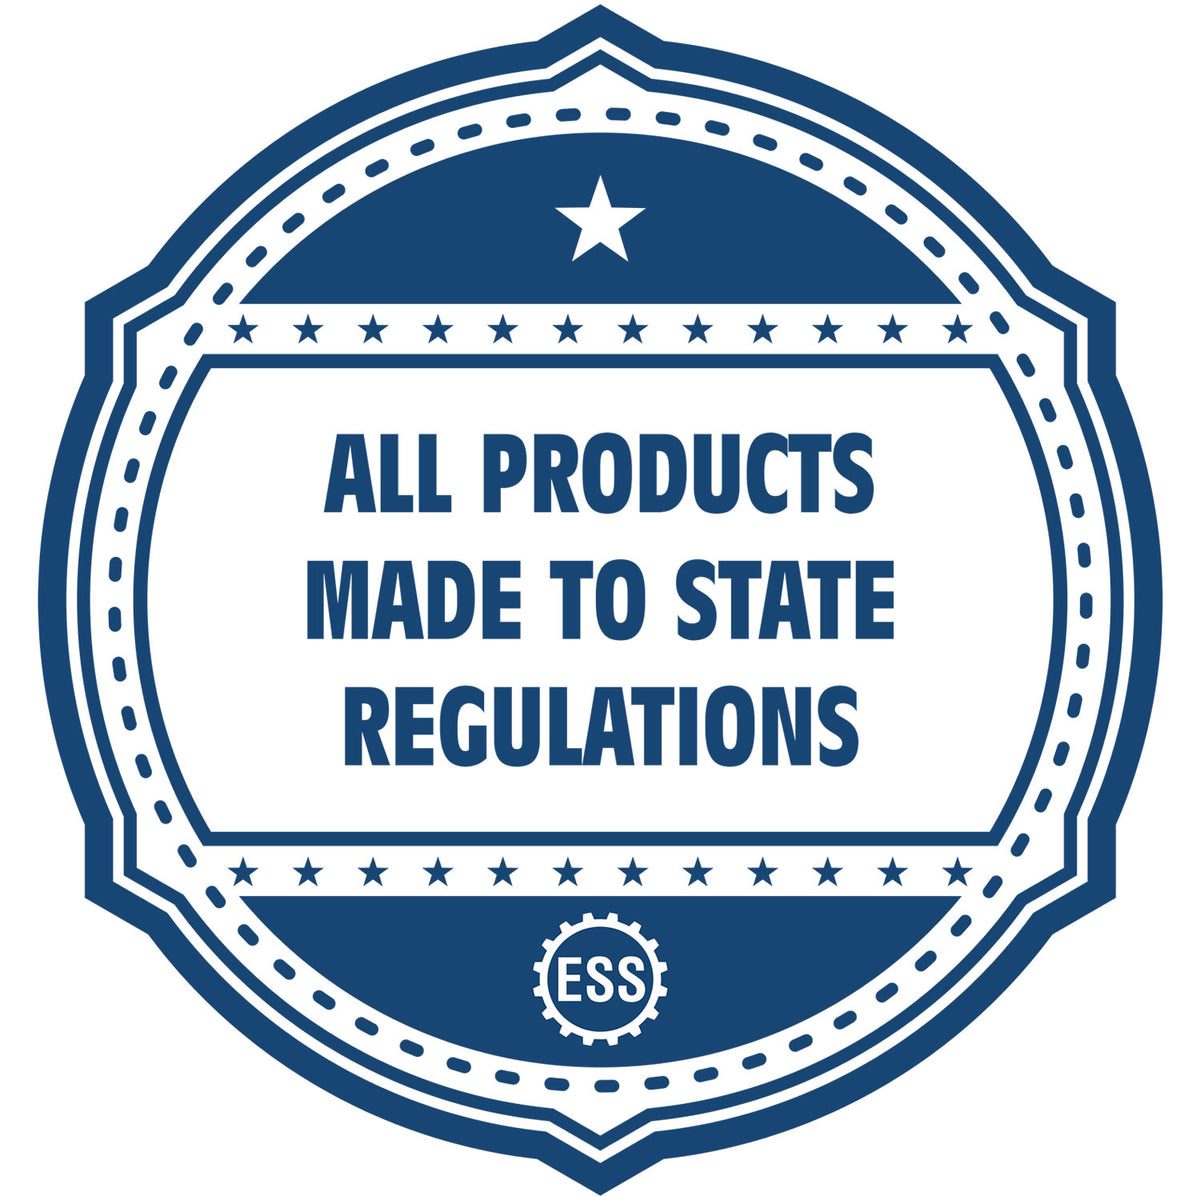 A blue icon or badge for the Gift Idaho Architect Seal showing that this product is made in compliance with state regulations.